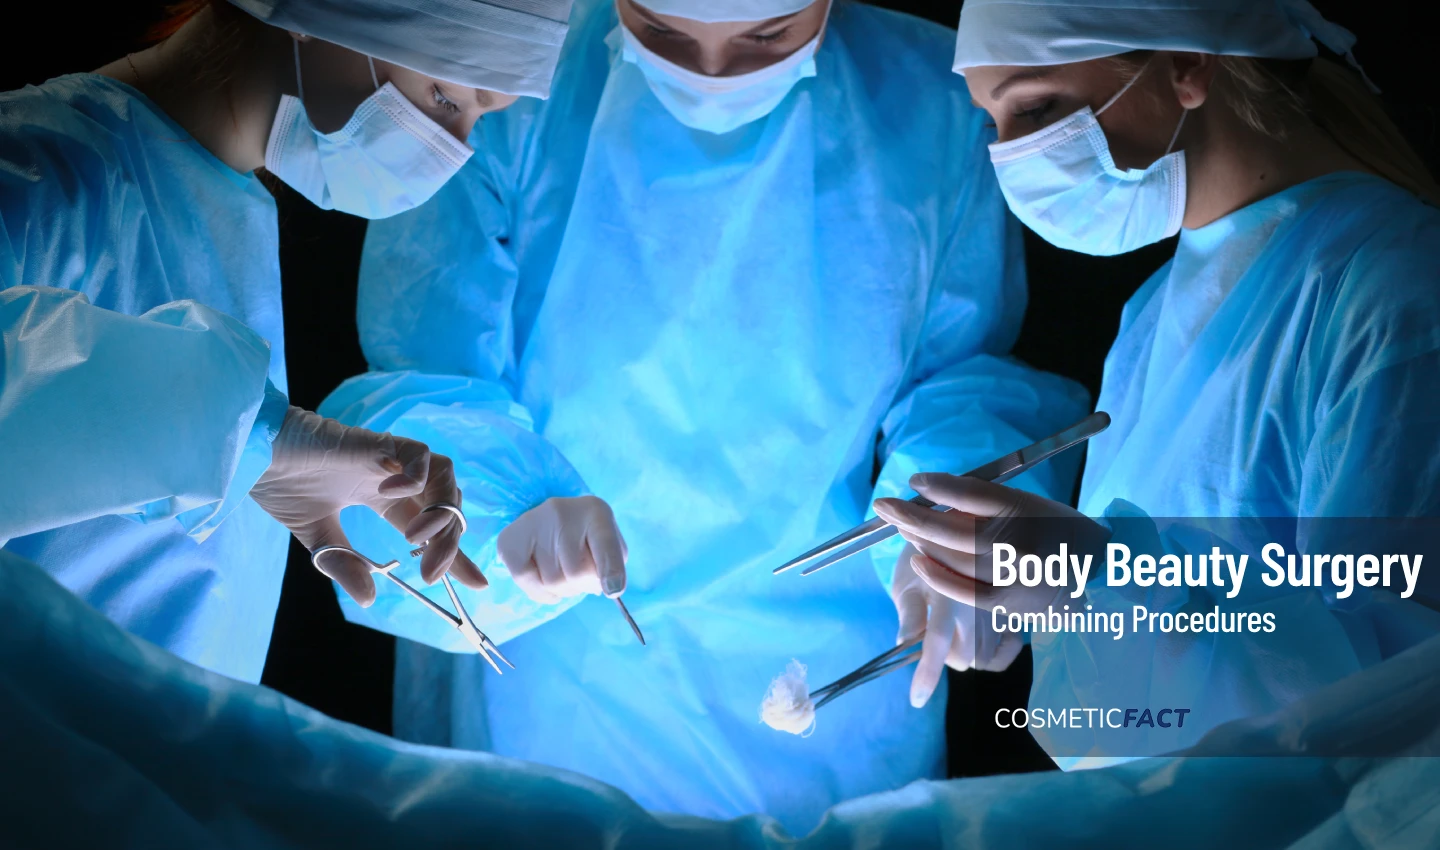 A surgical team performs multiple body cosmetic surgeries while focusing on managing patient expectations.